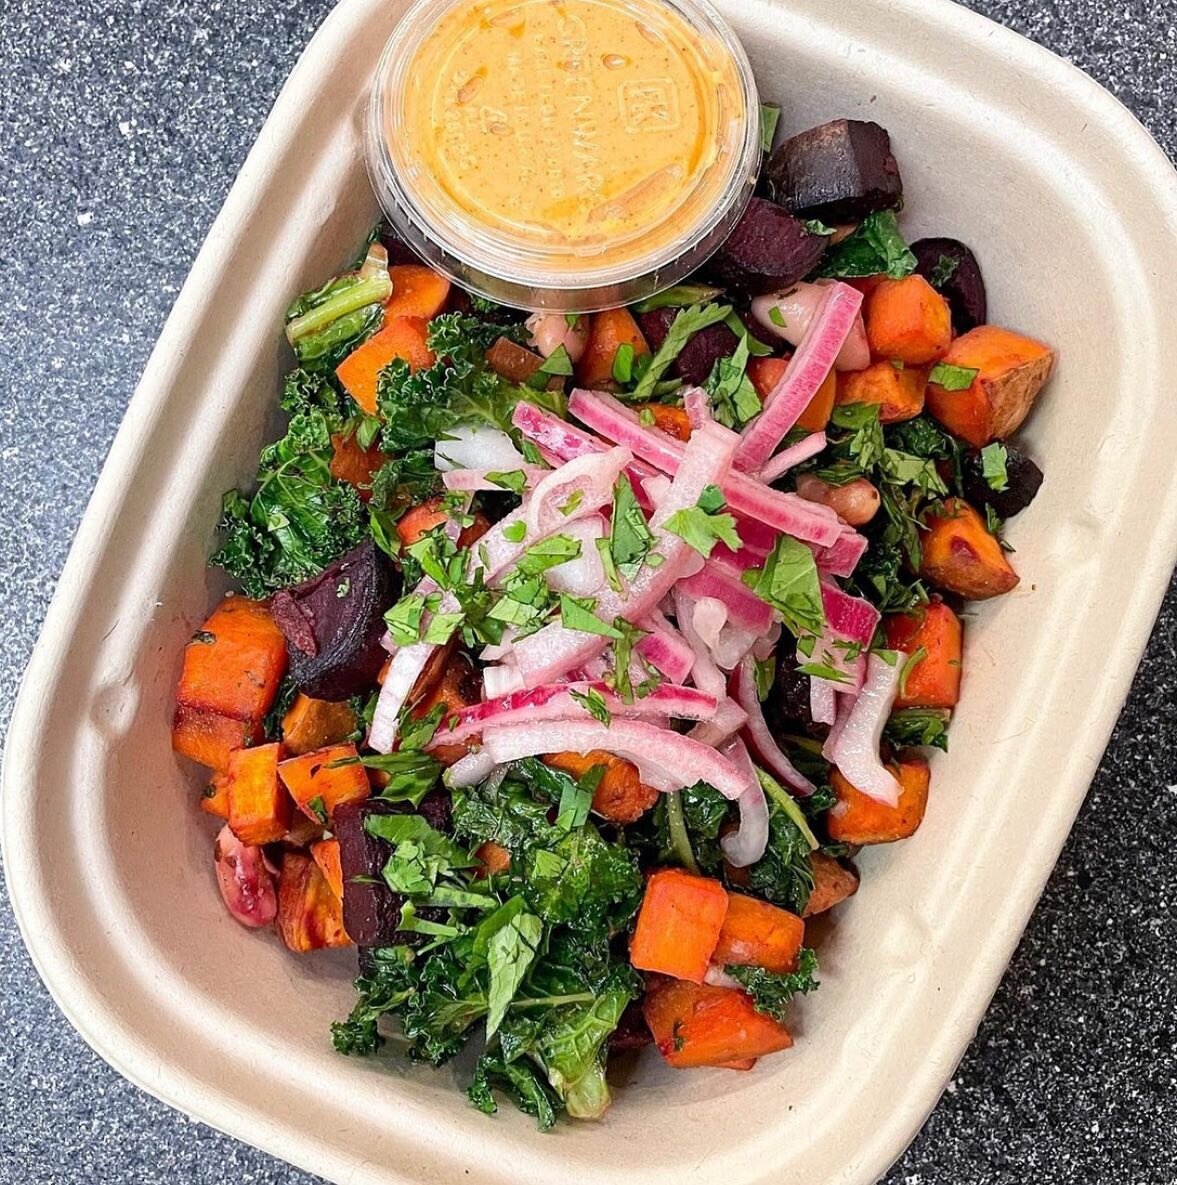 Sweet Beet Hash is available for delivery next week!

Start your day strong with fresh vegetables topped with pickled red onions and chipotle aioli 🦾

Ordering closes tonight at 8pm!